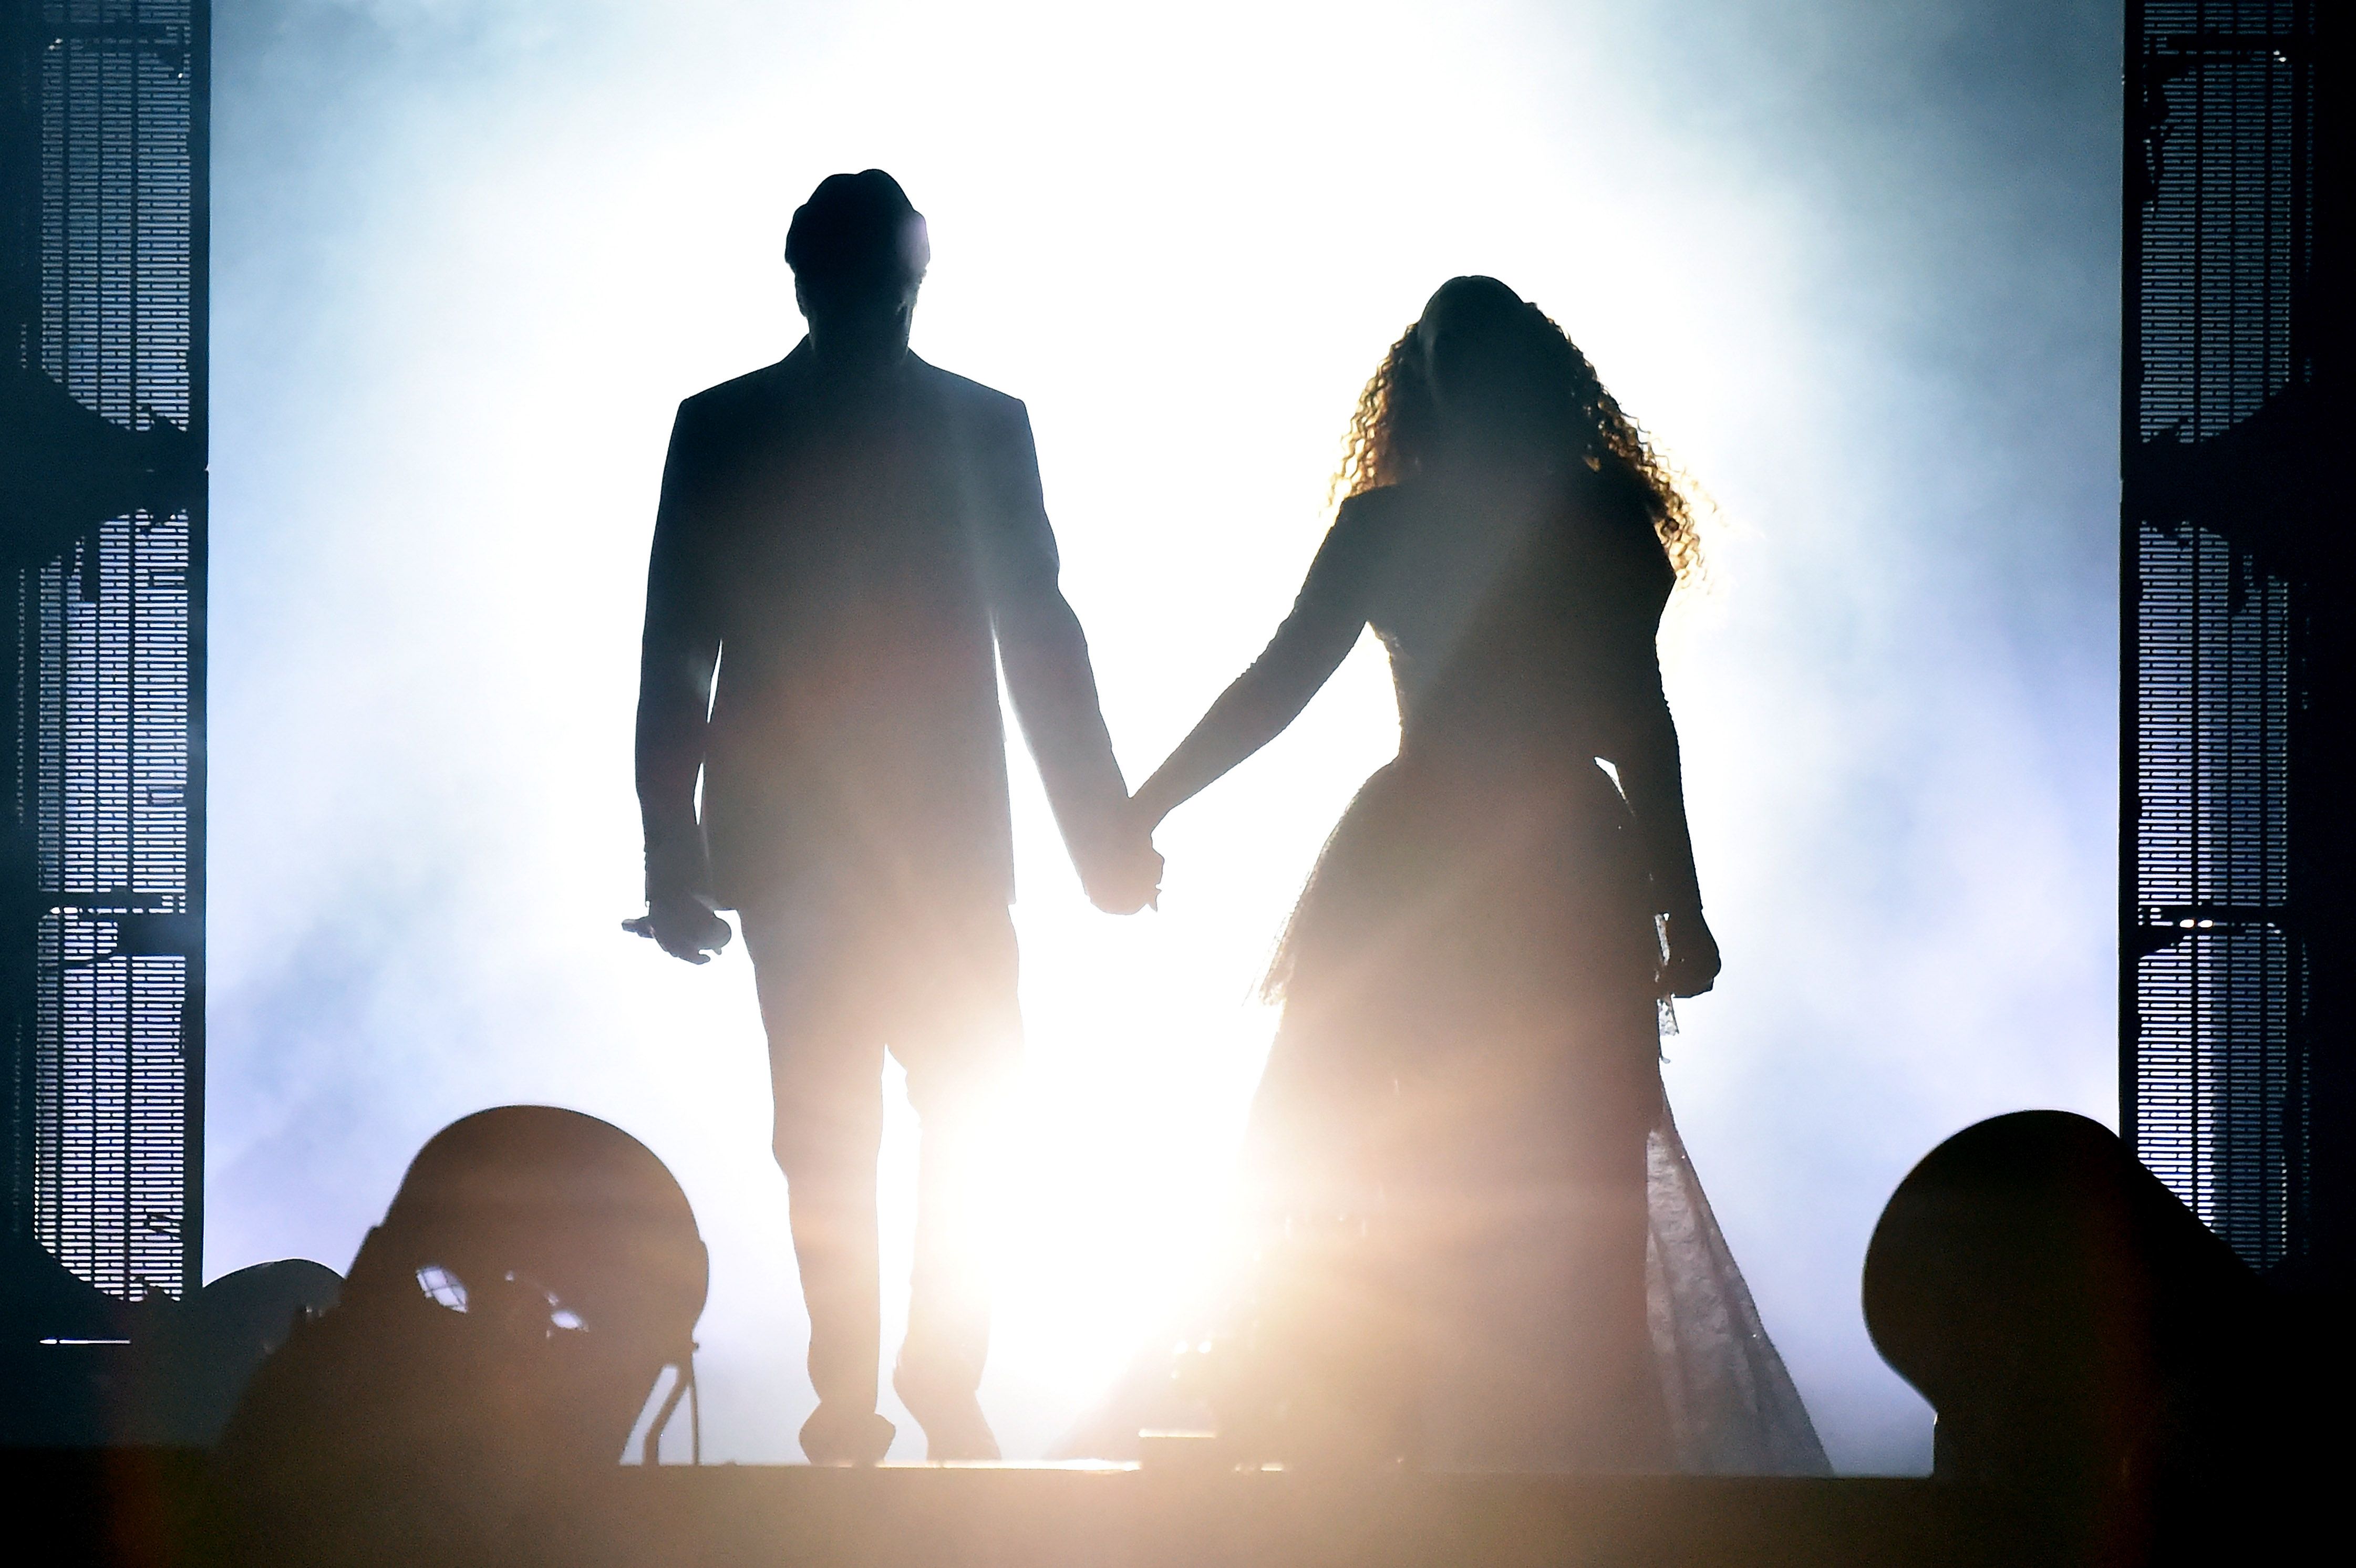 Beyoncé and Jay-Z Announce Their Tour… in Ski Masks?